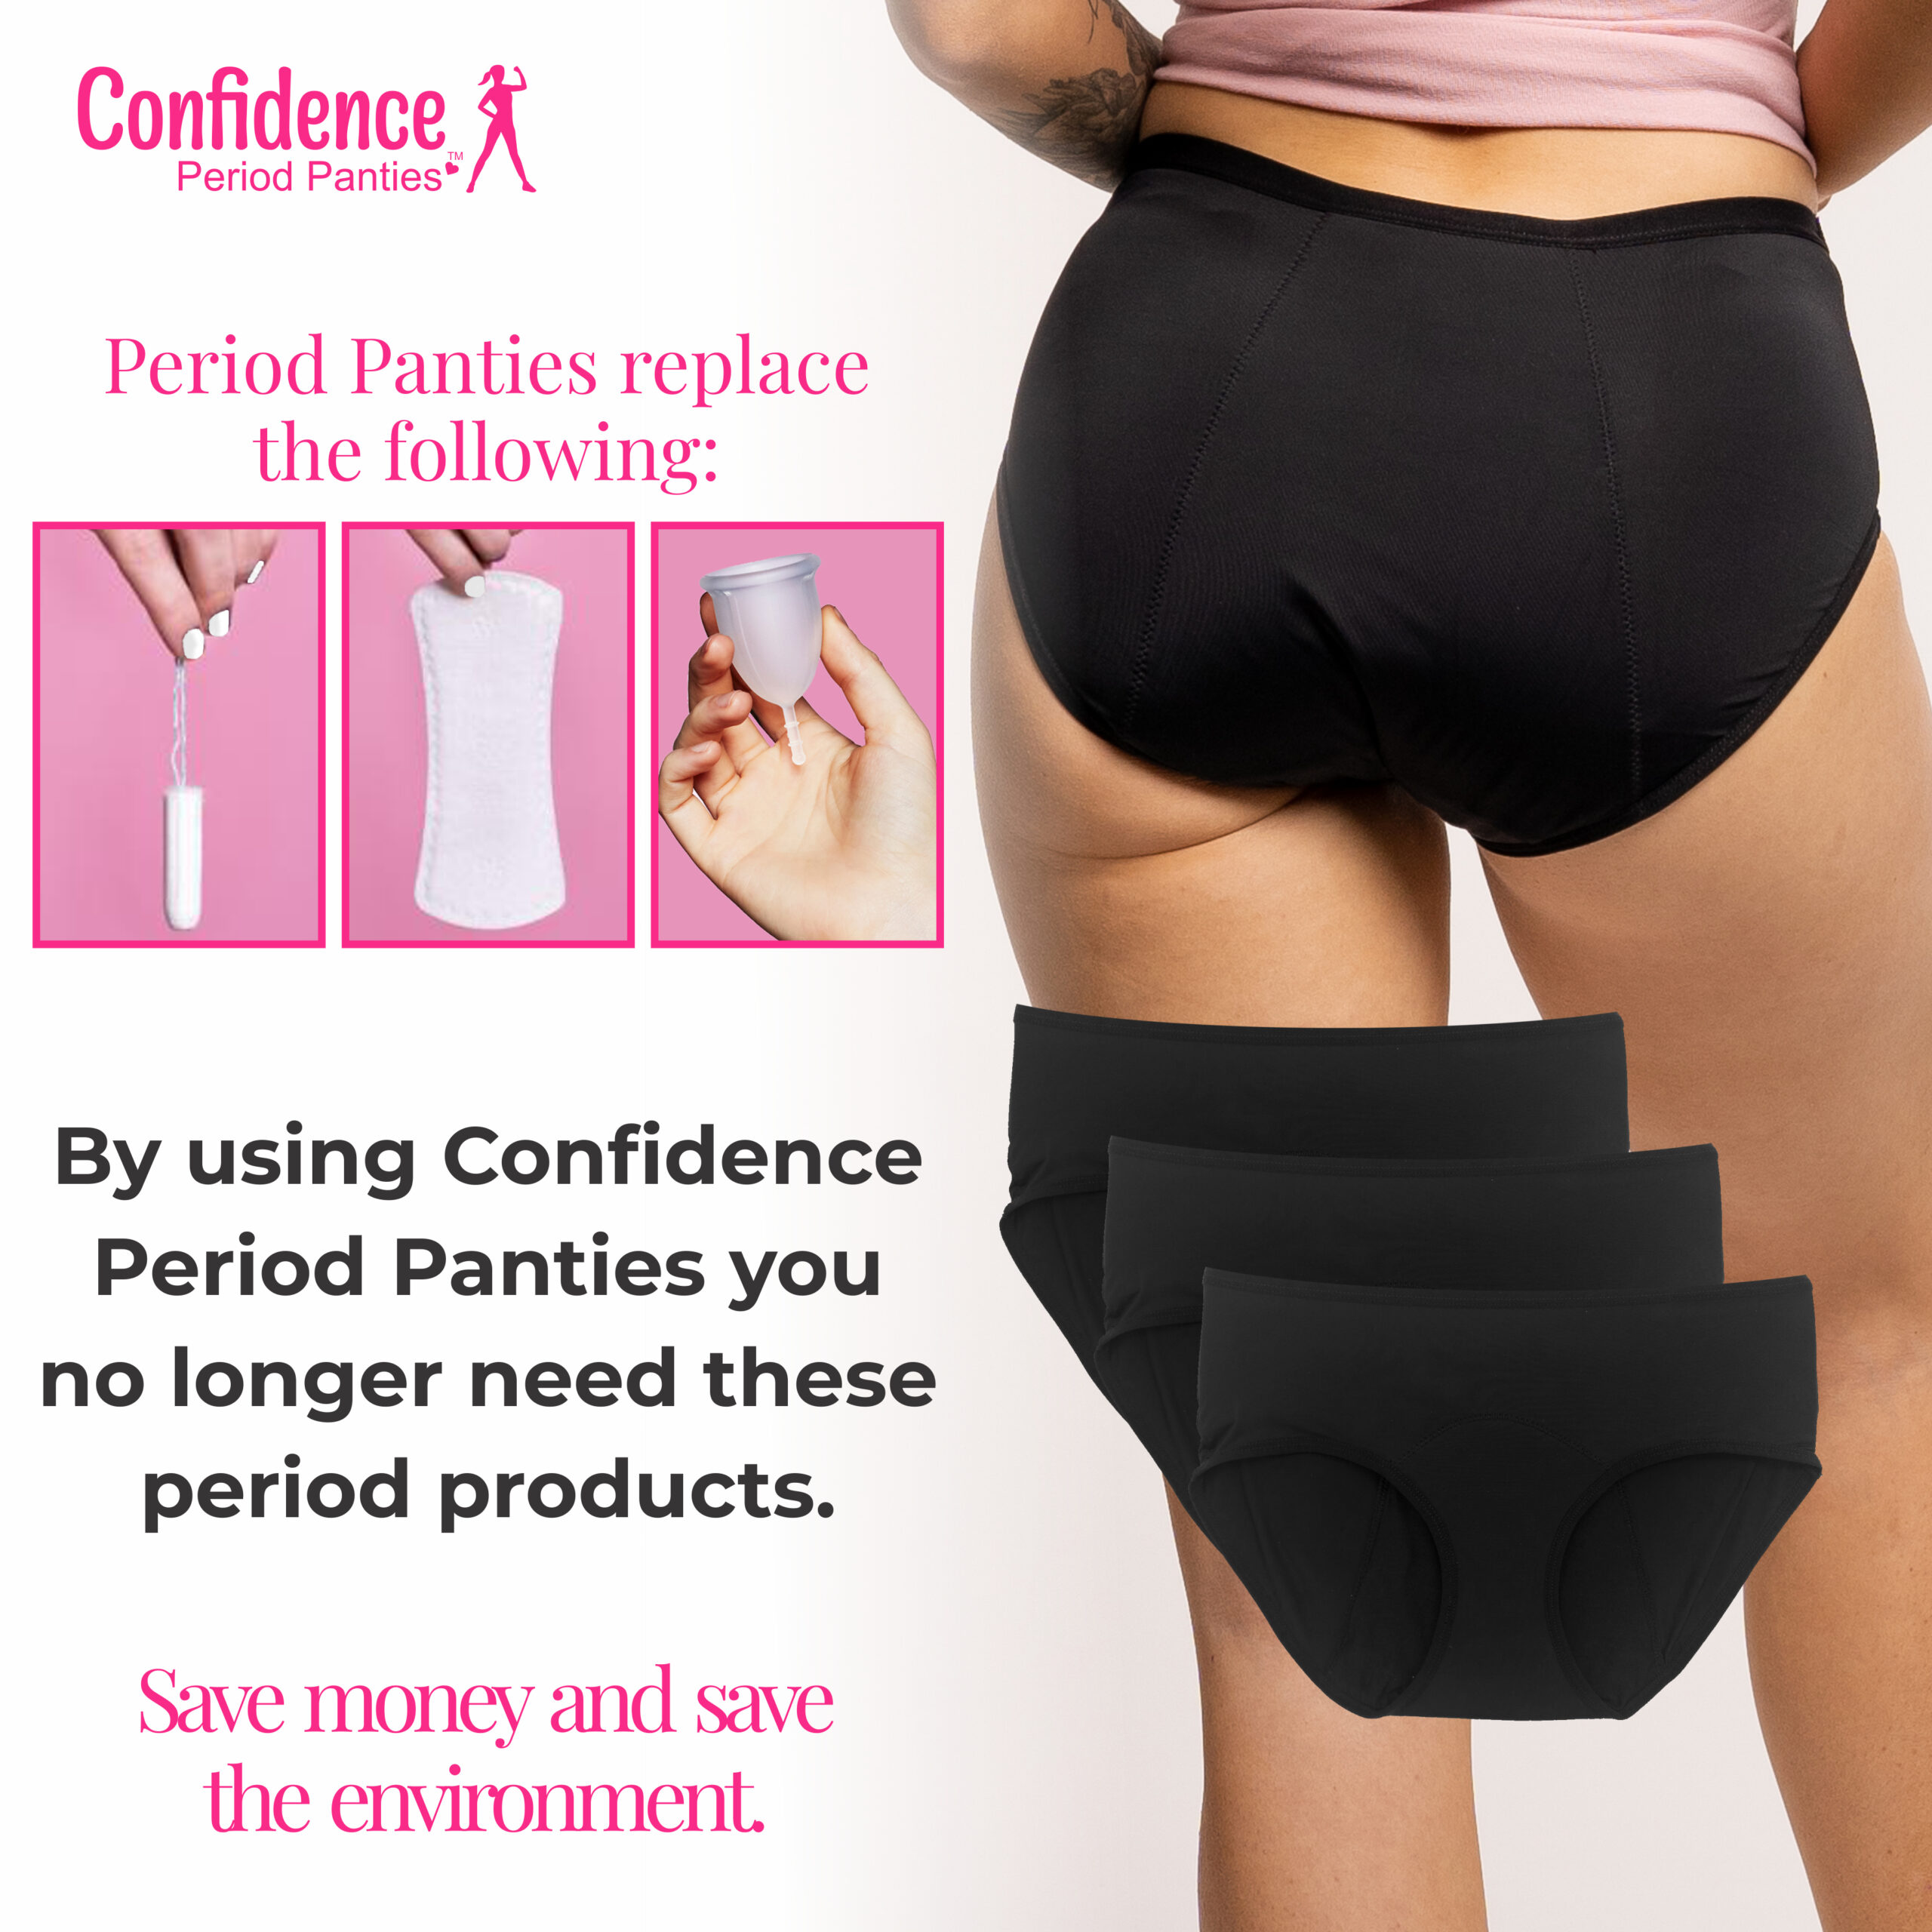 Curvy Women Period Panties For Stain Free Period | Hipster Fit | Leak Proof  | Use with Pad For Hygiene | Prevents Front & Back Stains | 3 Pack